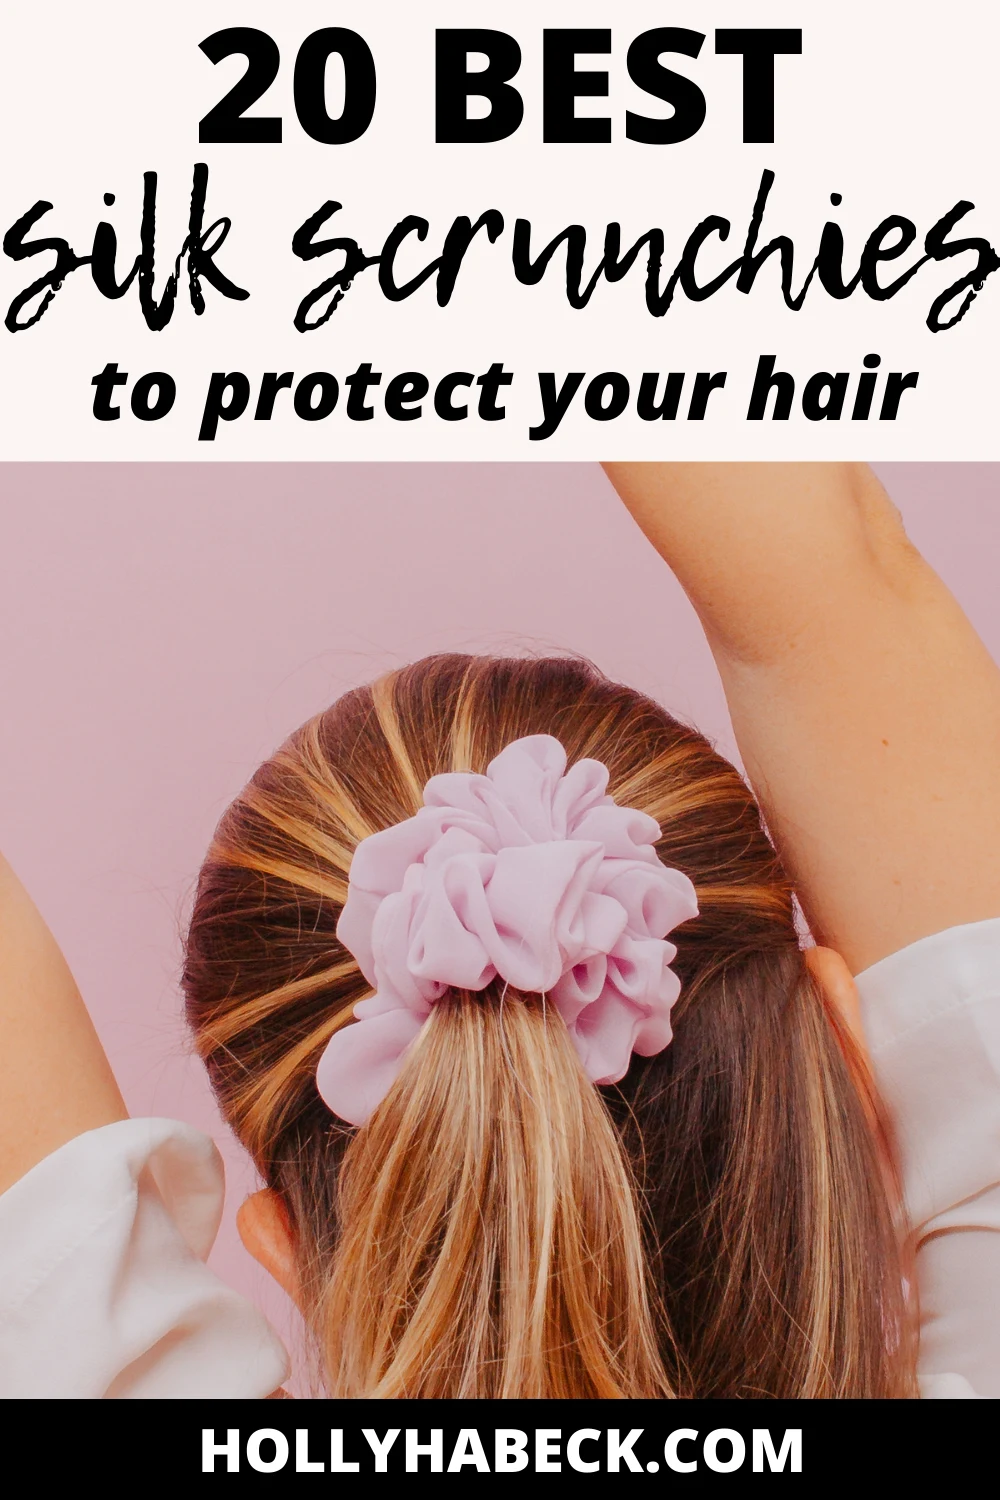 20 Best Silk Scrunchies to Protect Your Hair